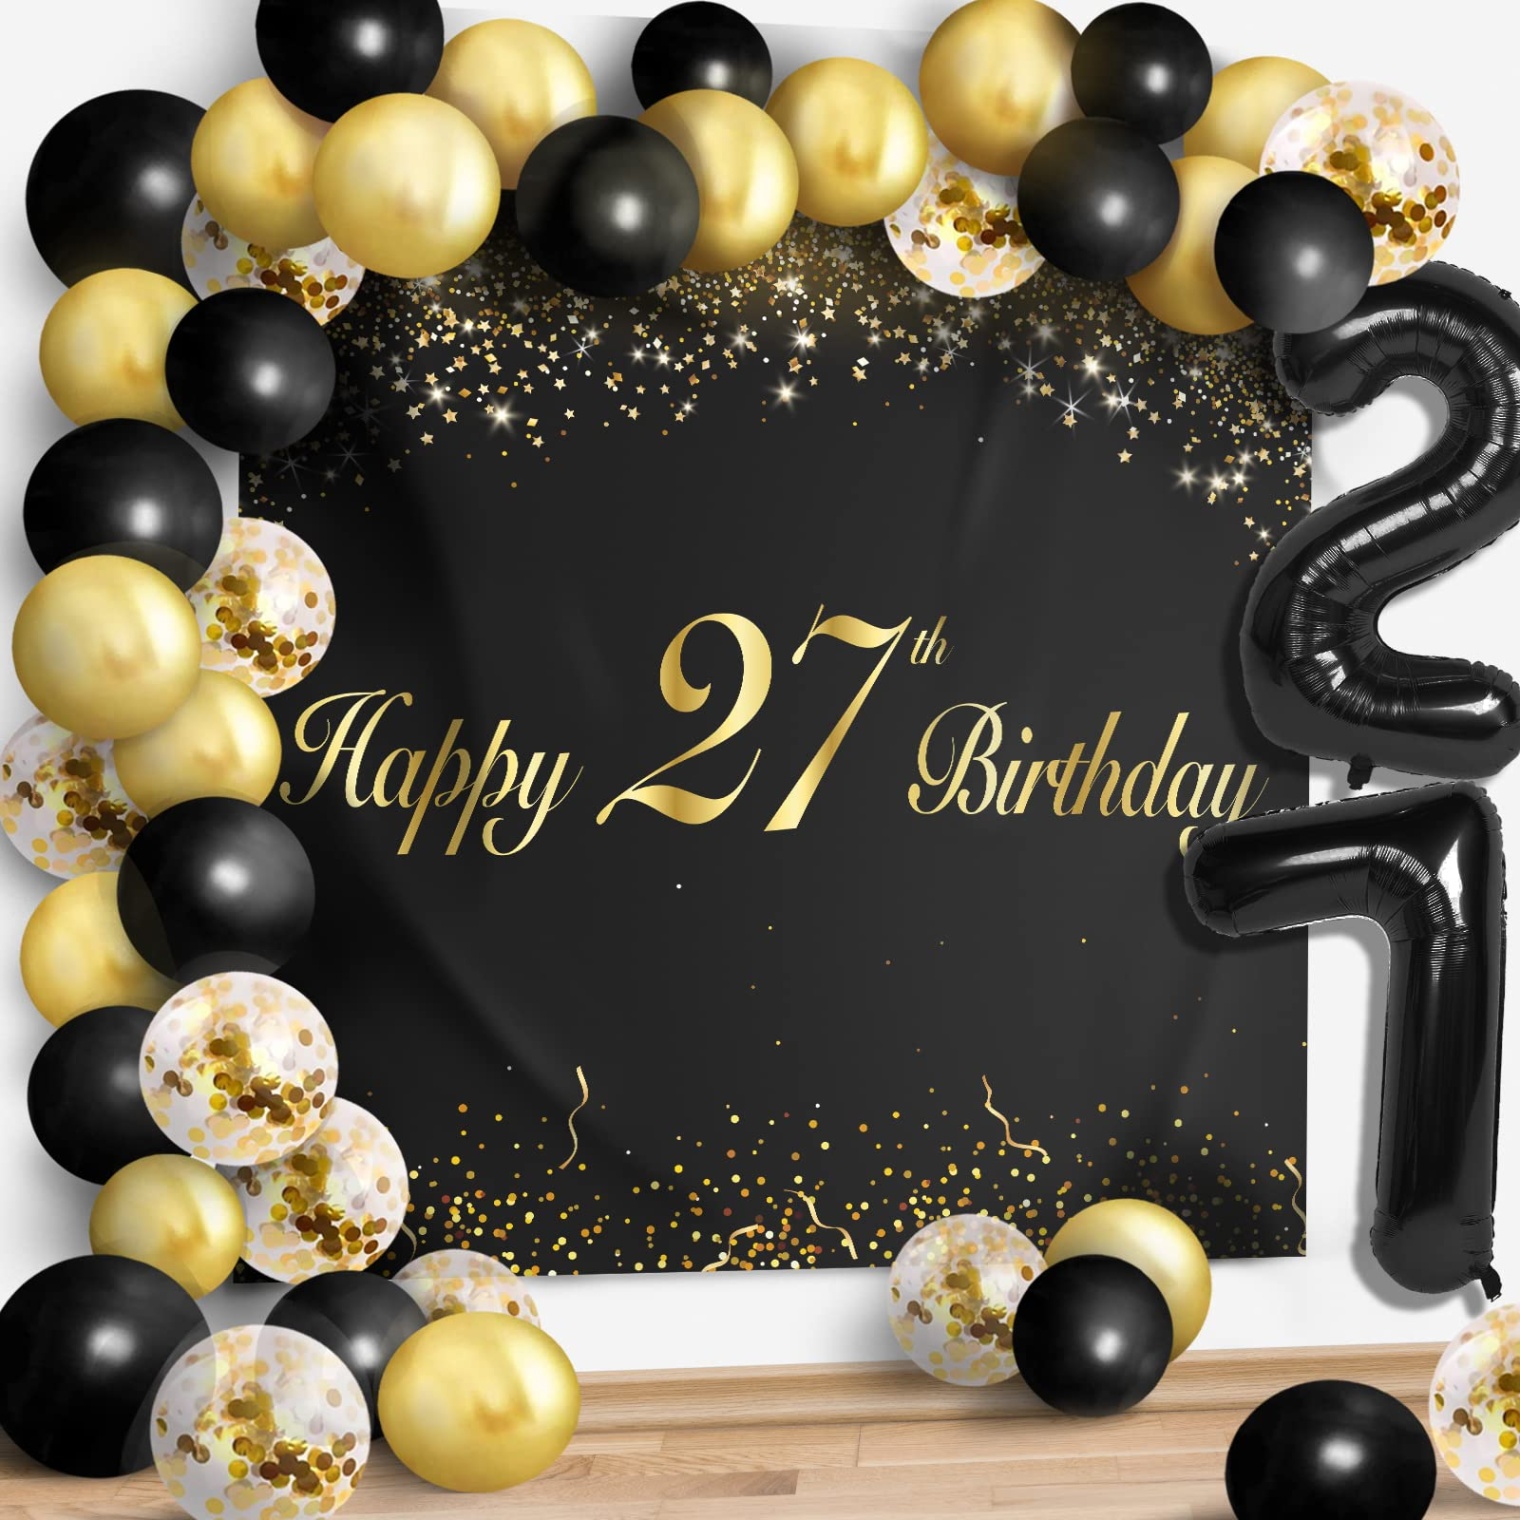 birthday balloons decorations Bulan 5 Happy th Birthday Balloons Black Set Decor - Cheers to  Years Old Party  Theme Garland Banner Backdrop Decorations For Women and Men Supplies